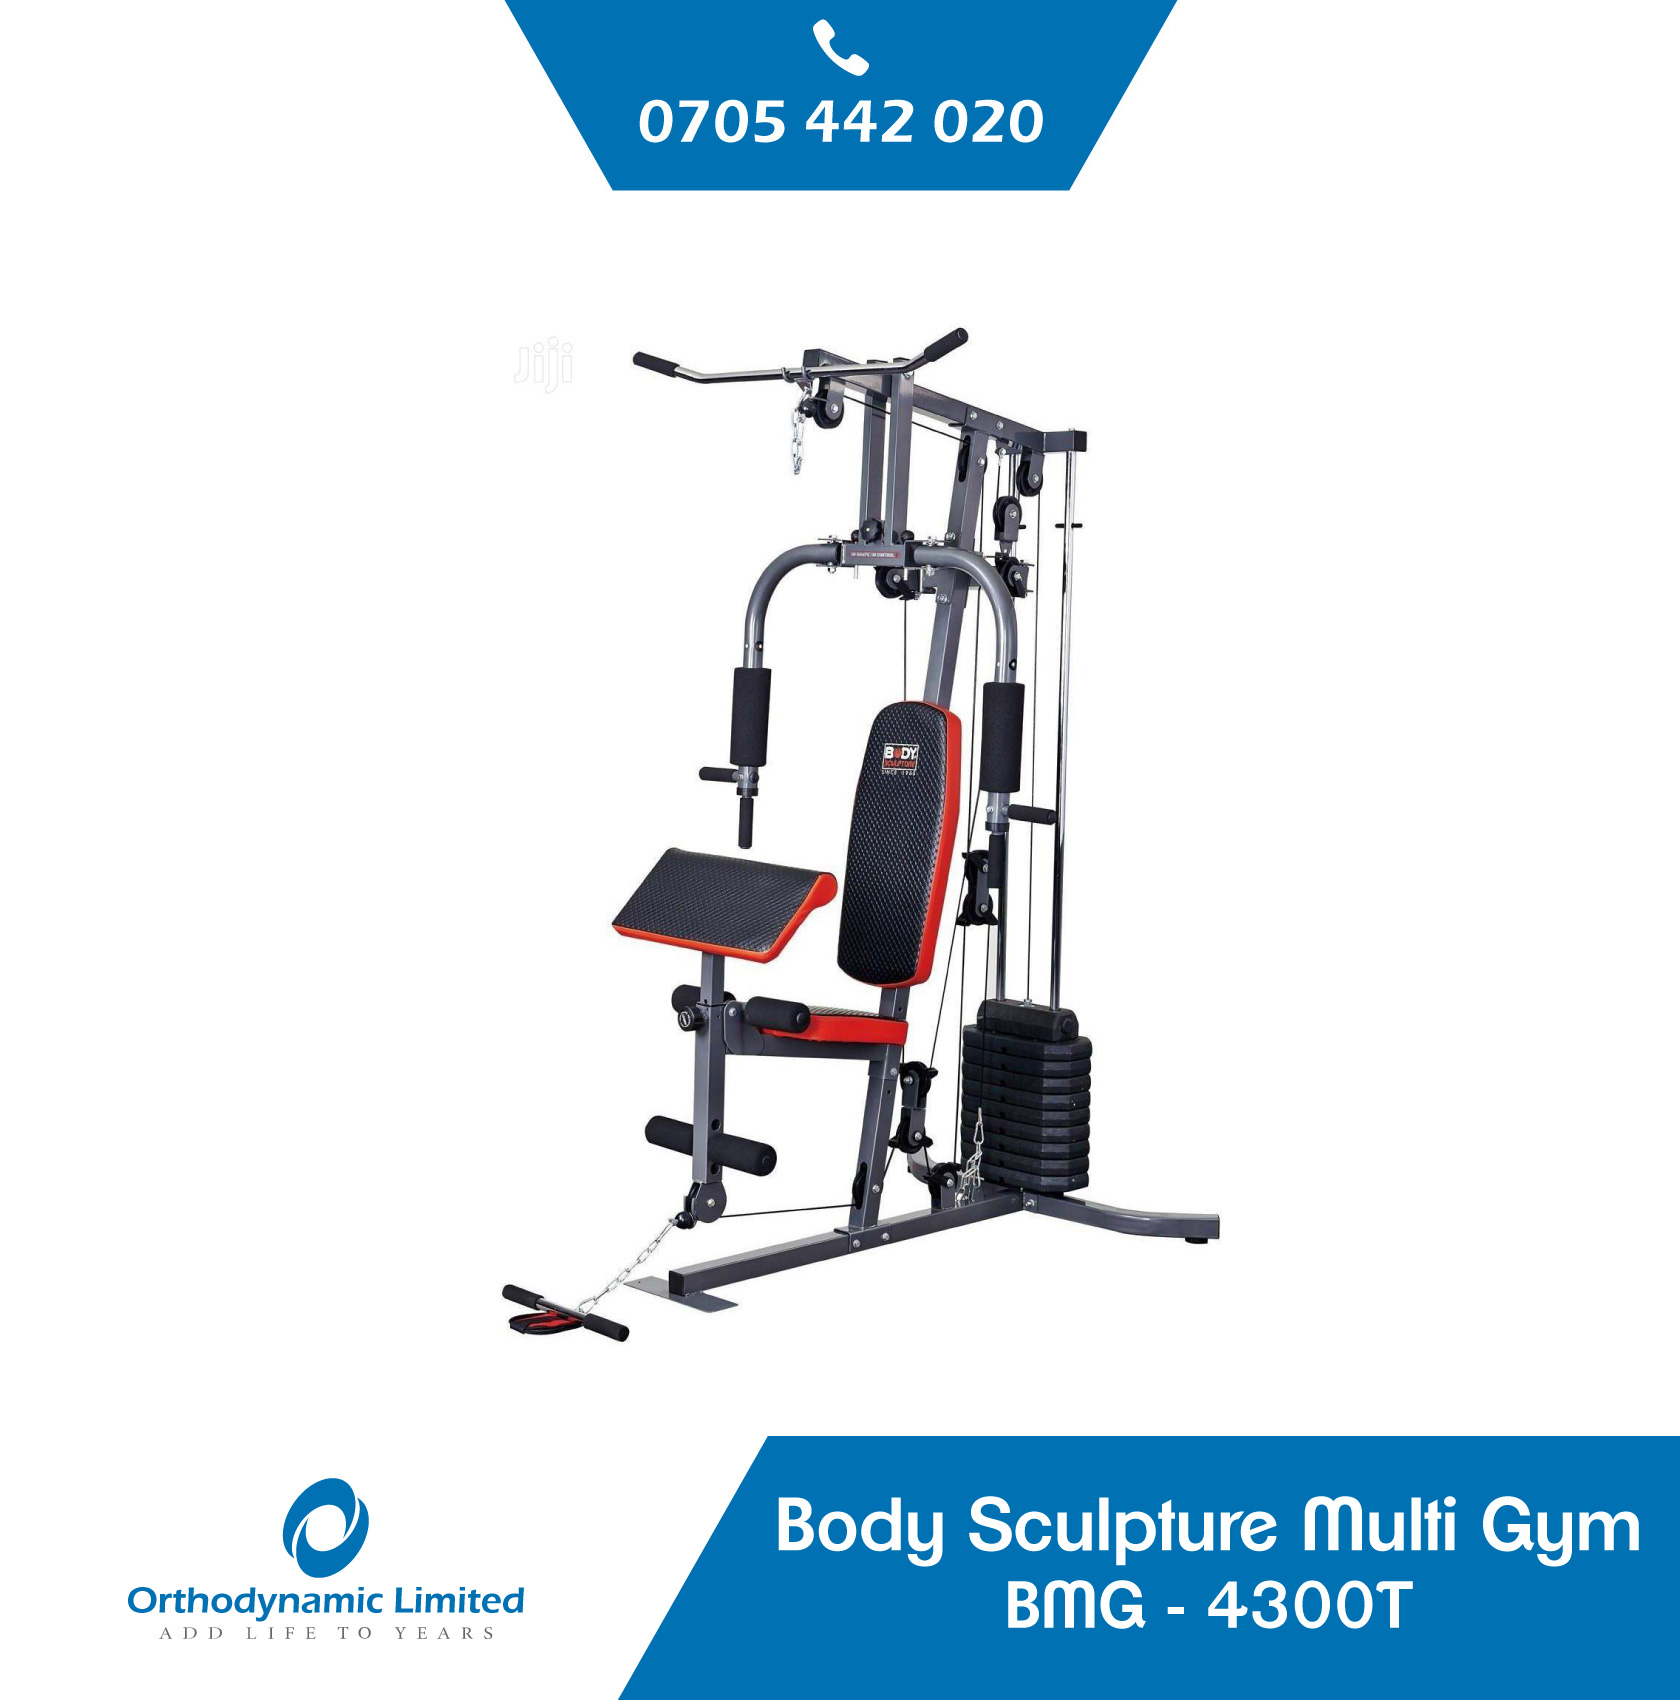 Body Sculpture Multi Gym BMG-4300T for Home use